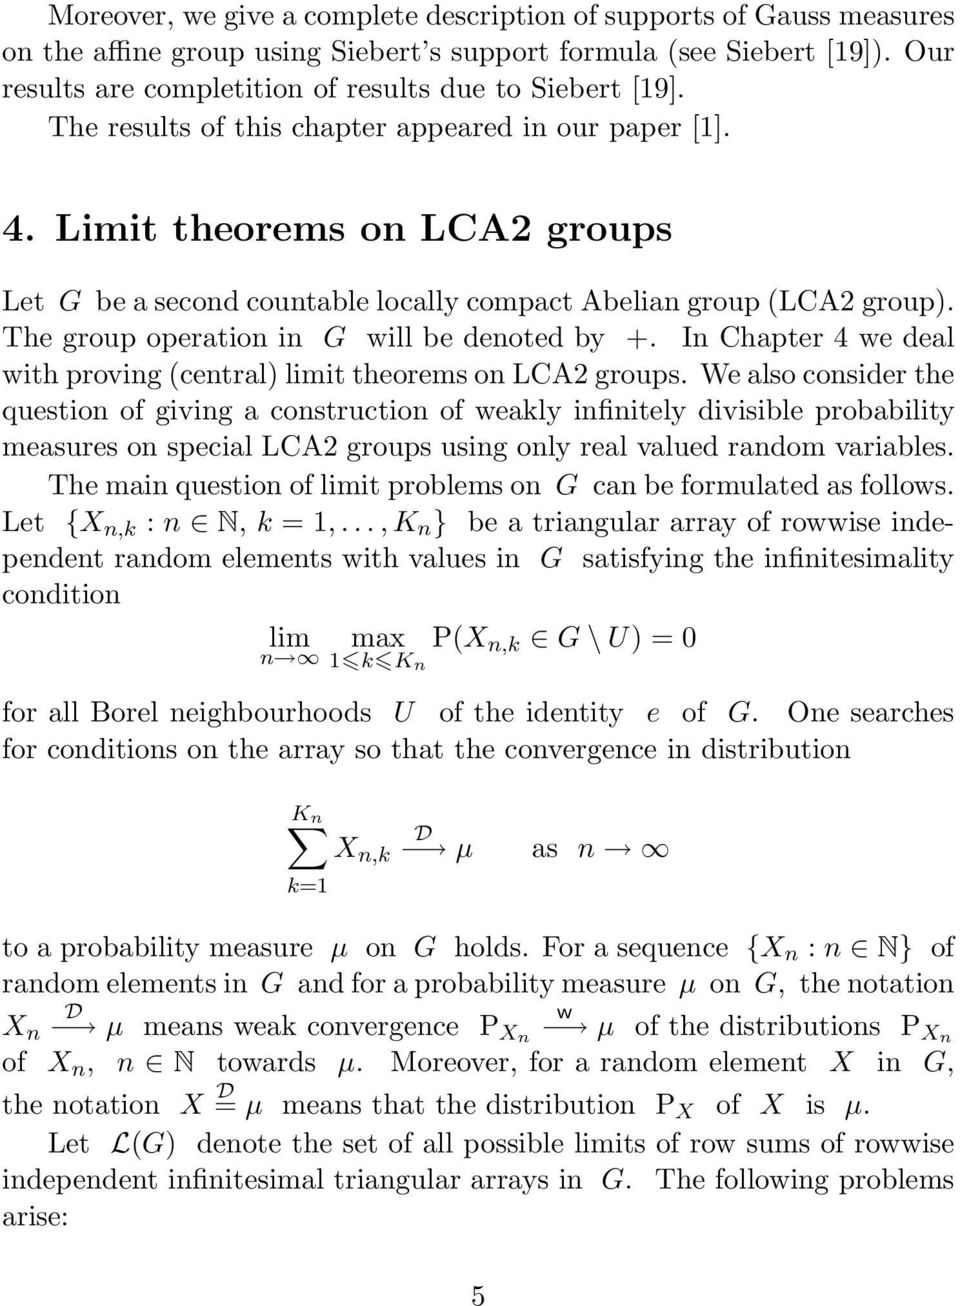 Limit theorems on LCA2 groups Let G be a second countable locally compact Abelian group (LCA2 group). The group operation in G will be denoted by +.